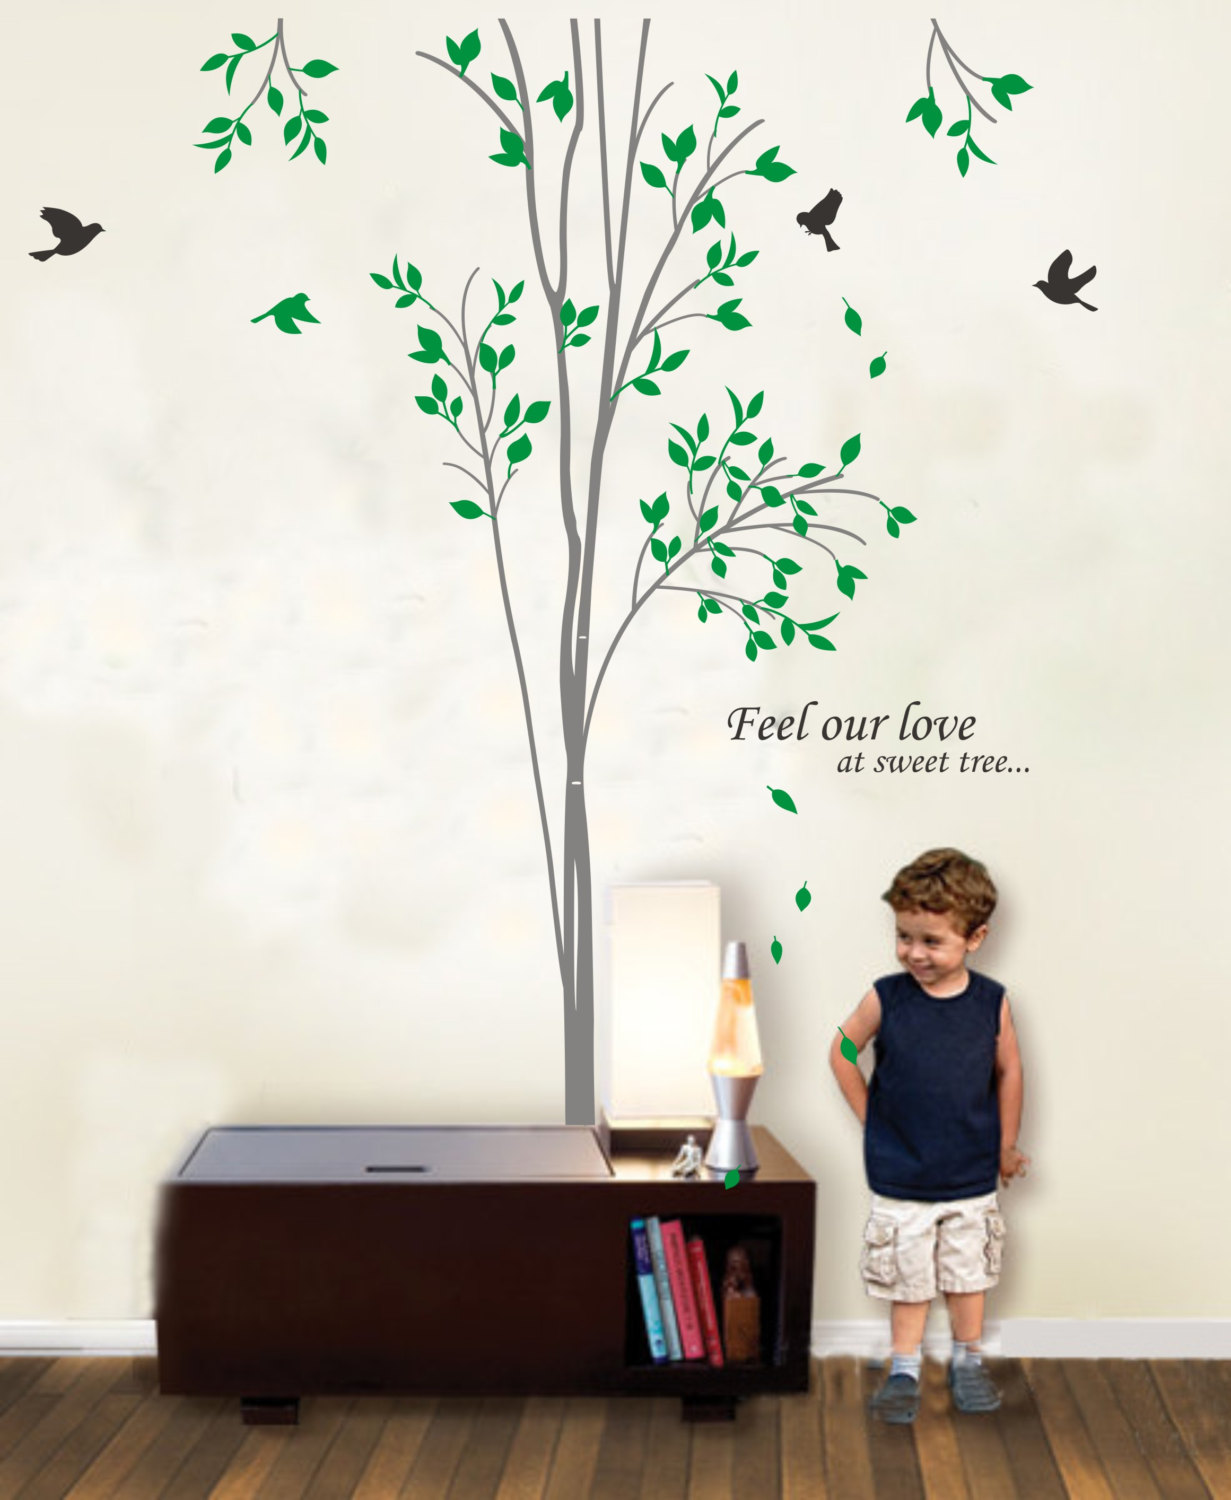 Vinyl Wall Decal Spring Tree With Leaves Flying Birds Trees Bird Leaf Home House Art Wall Decals Wall Sticker Stickers Baby Room Kid R813